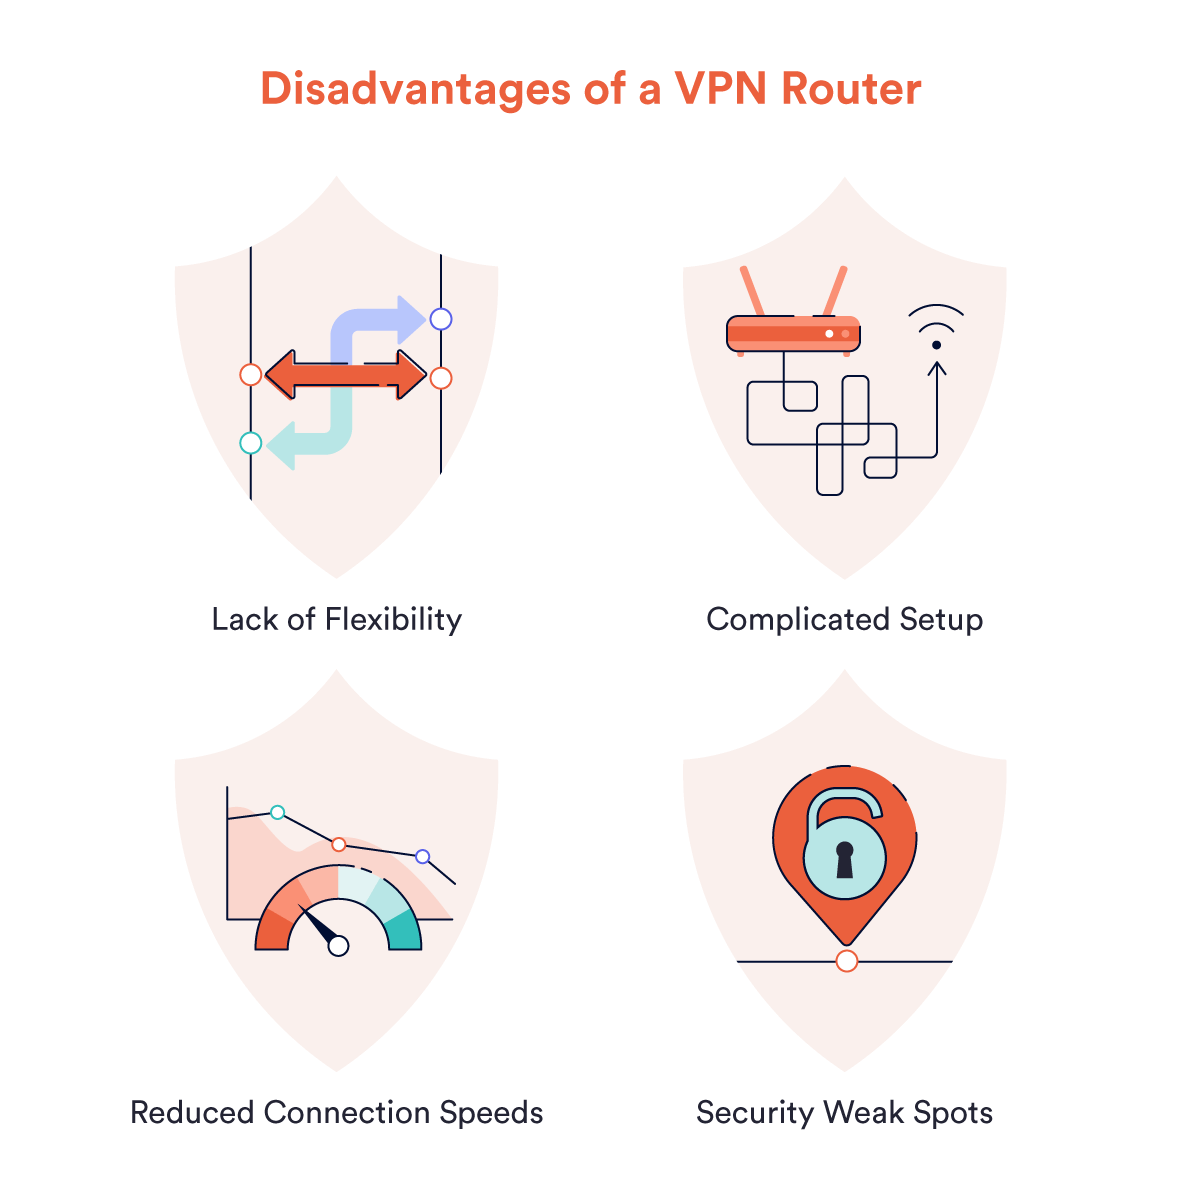 Illustration showing the disadvantages of a VPN router.